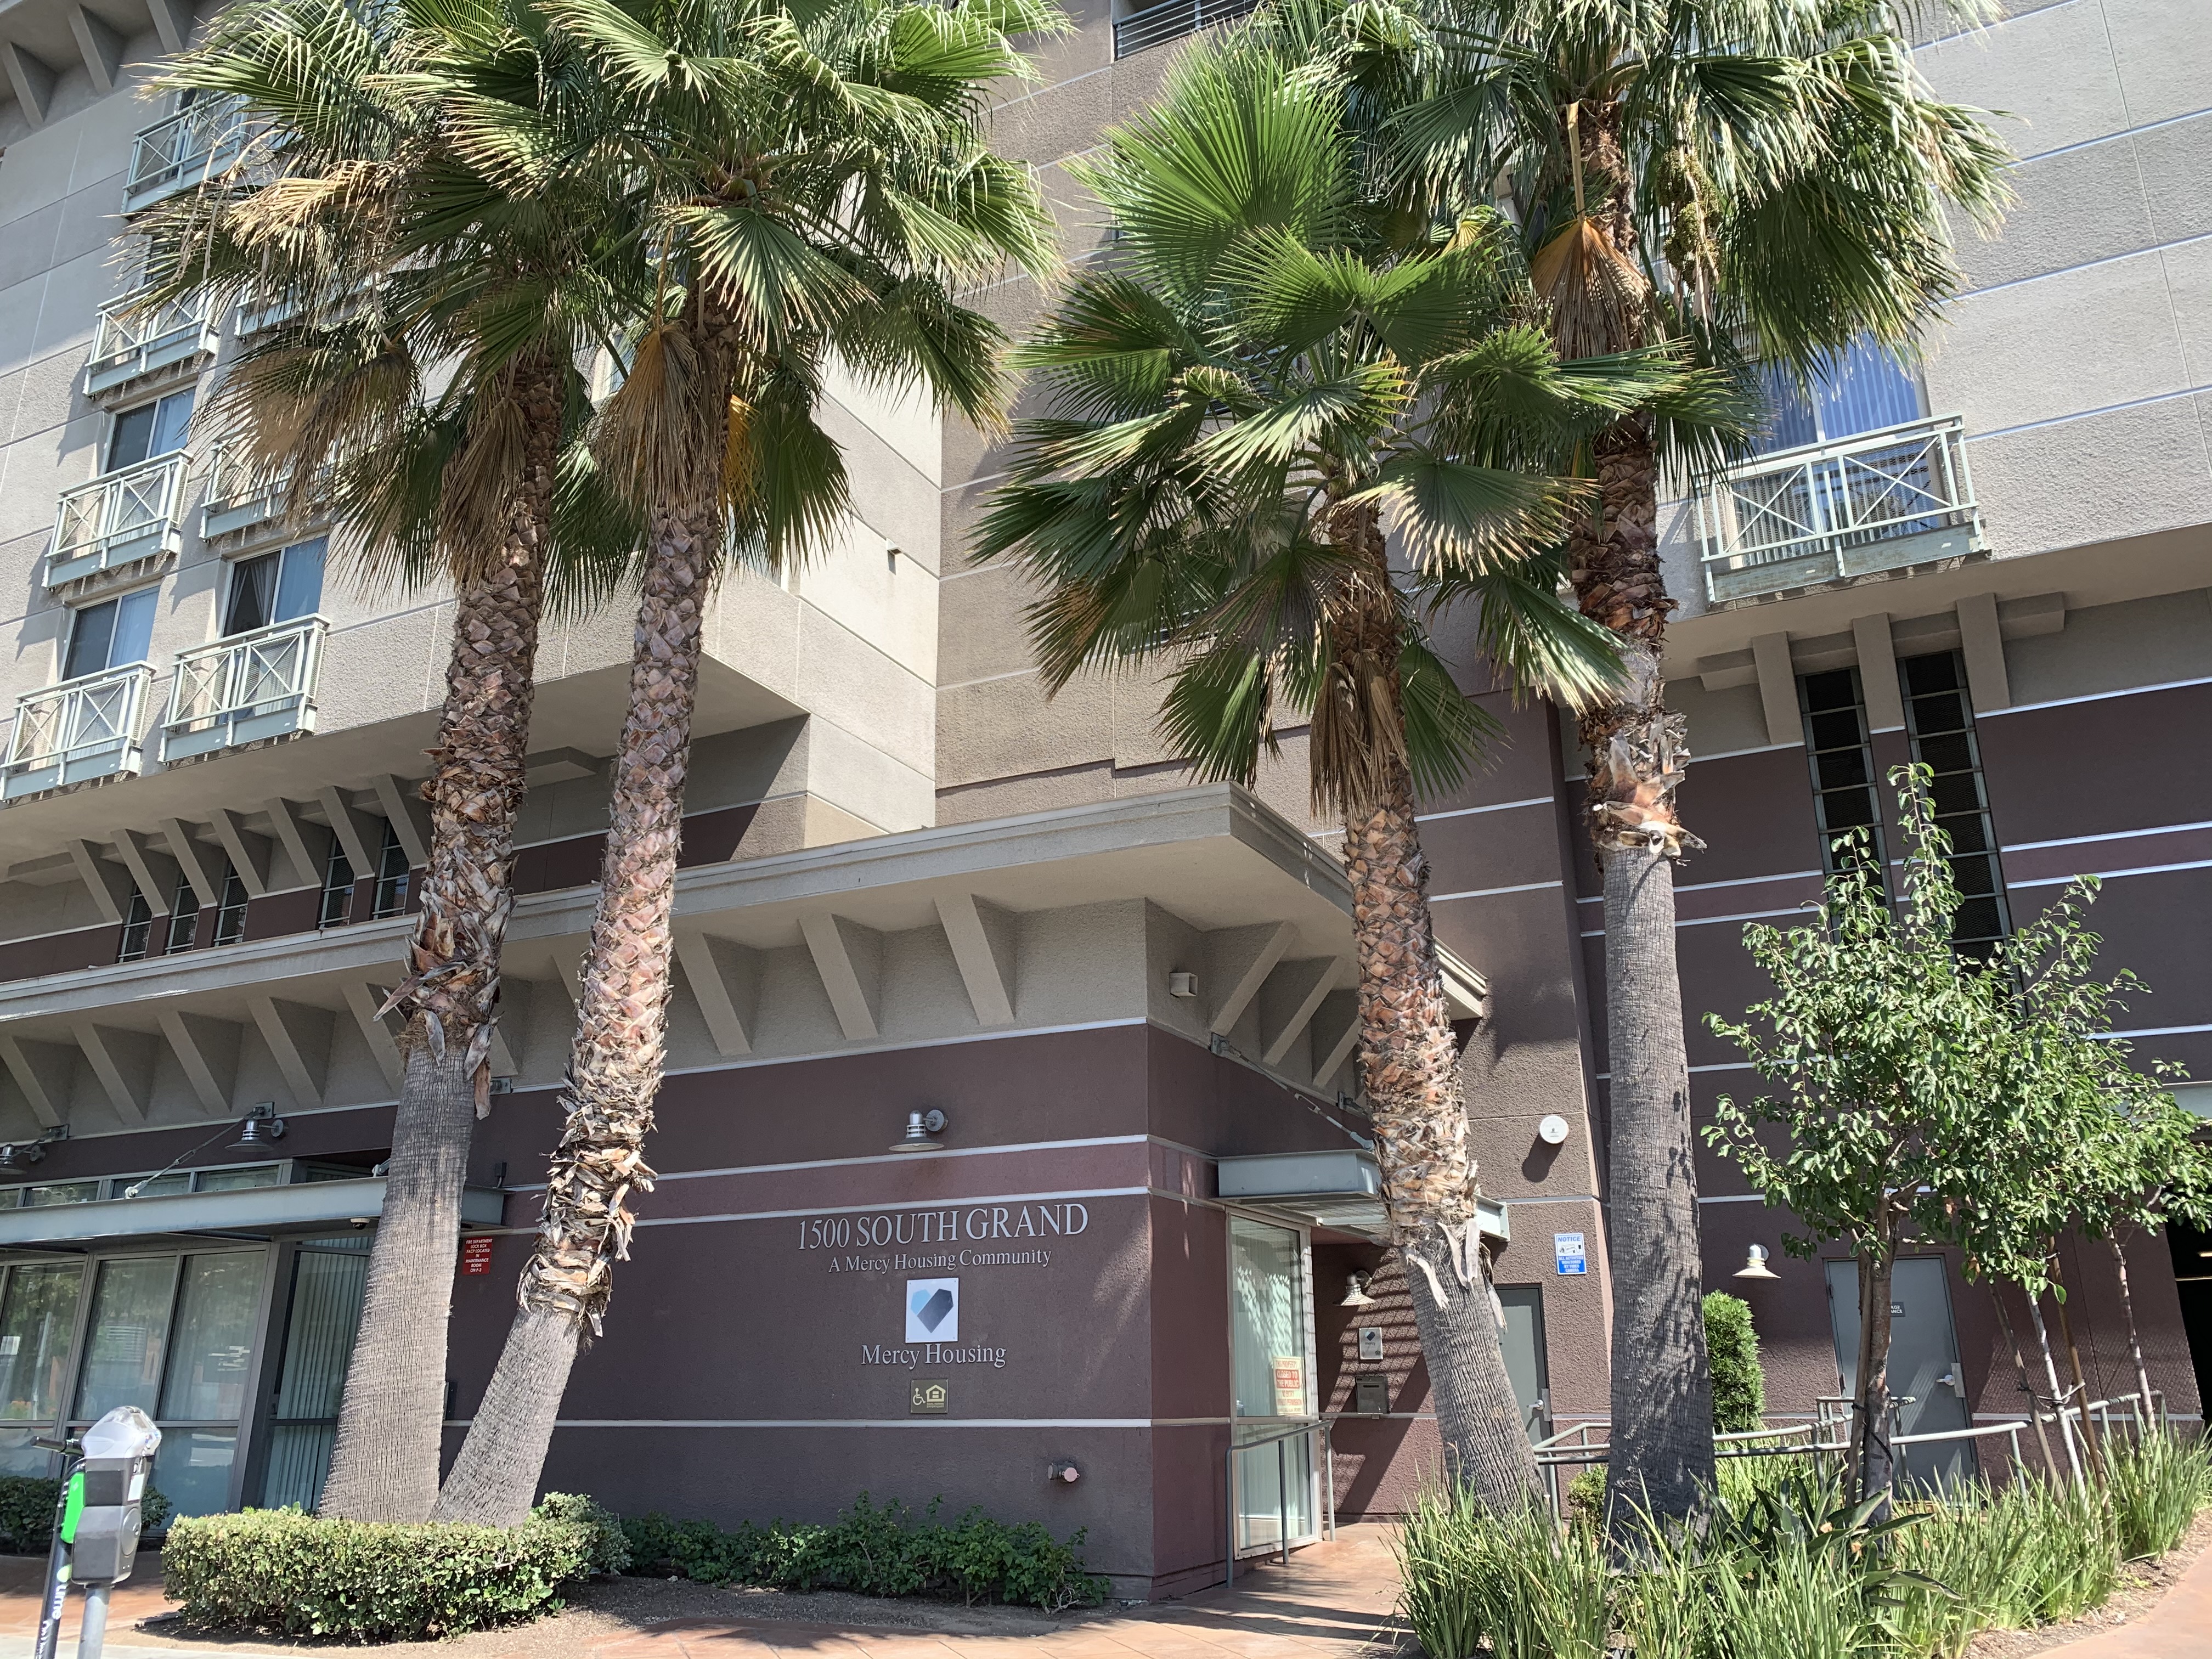 Front view of brown and beige multiple floors, double palm trees in front and more plants surrounding the entrance, multiple windows some with balconies, parking meter.